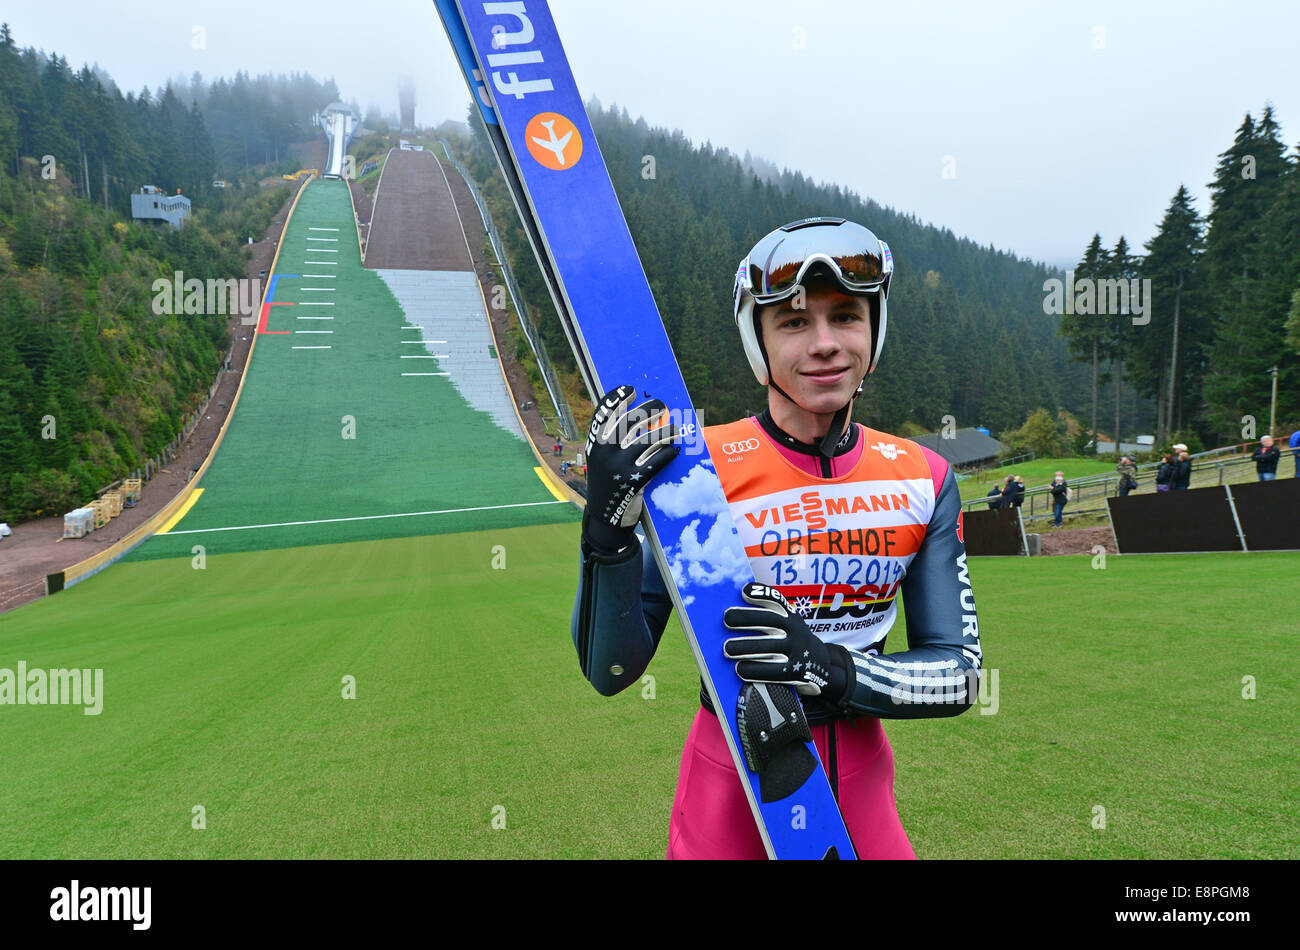 Junior Athlete Philipp Blaurock Is Pictured After His Initiation for ski jumping 1987 intended for Residence